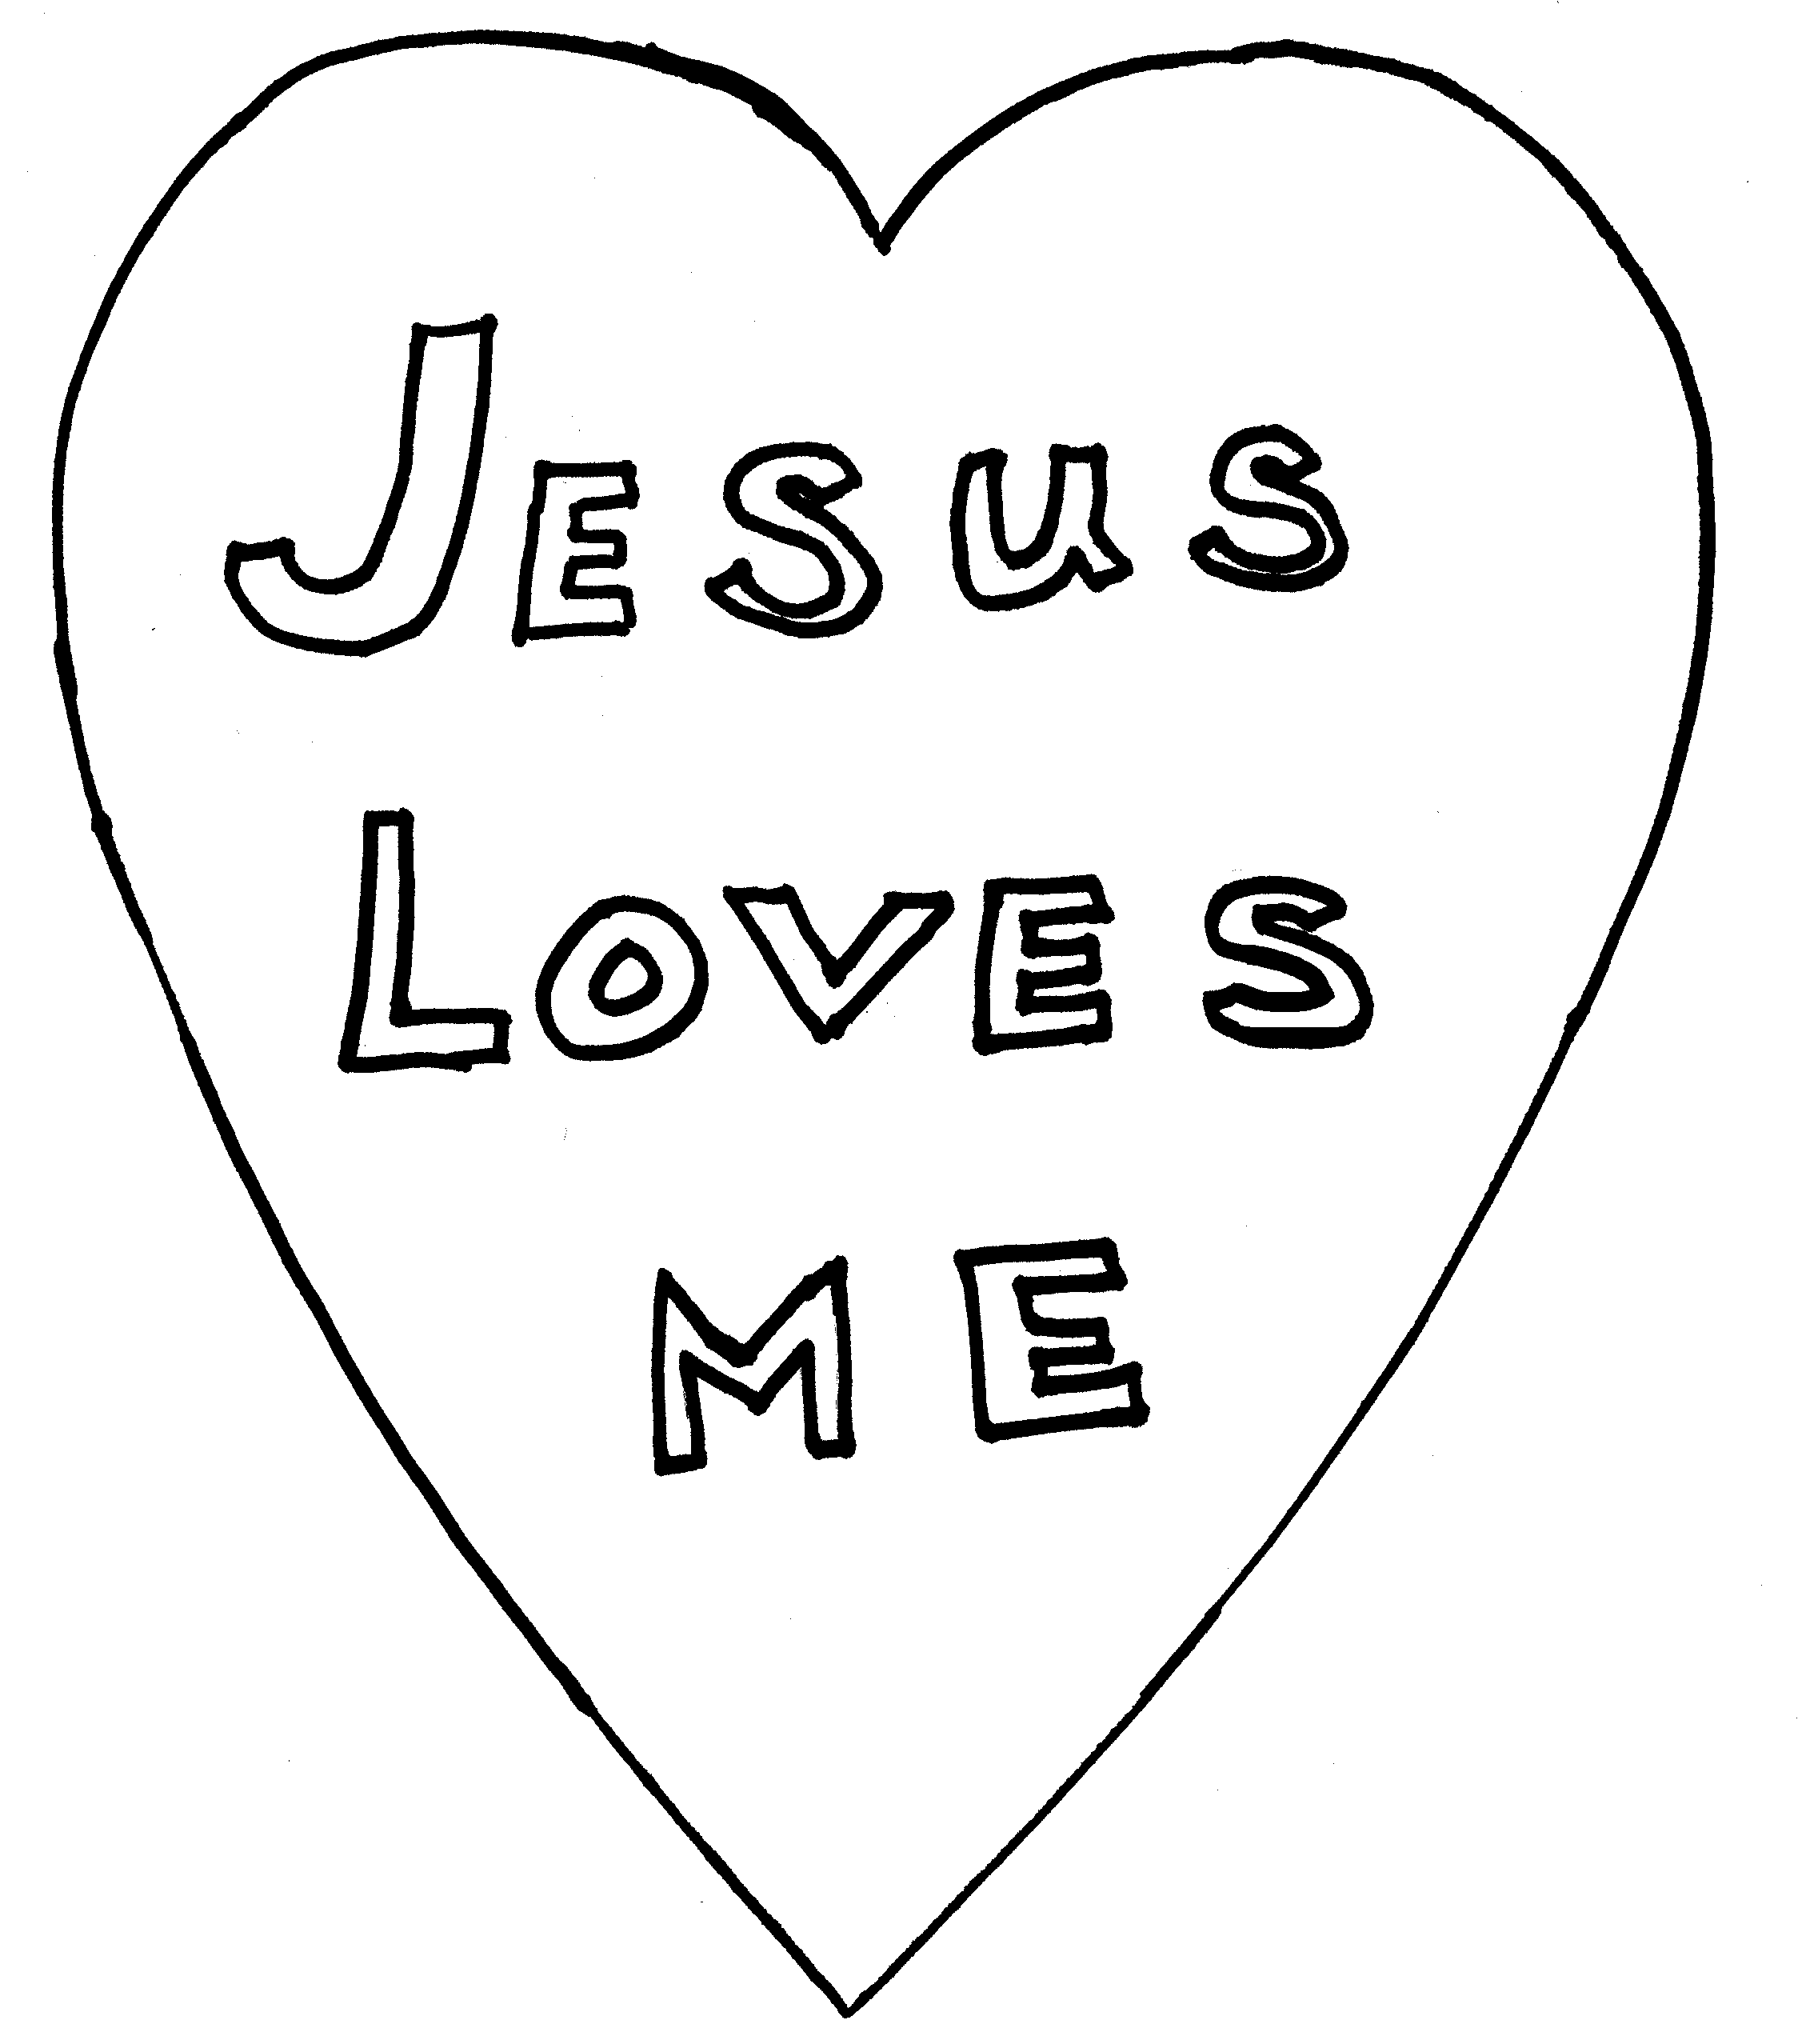 Free Printable Jesus Loves Me Coloring Pages